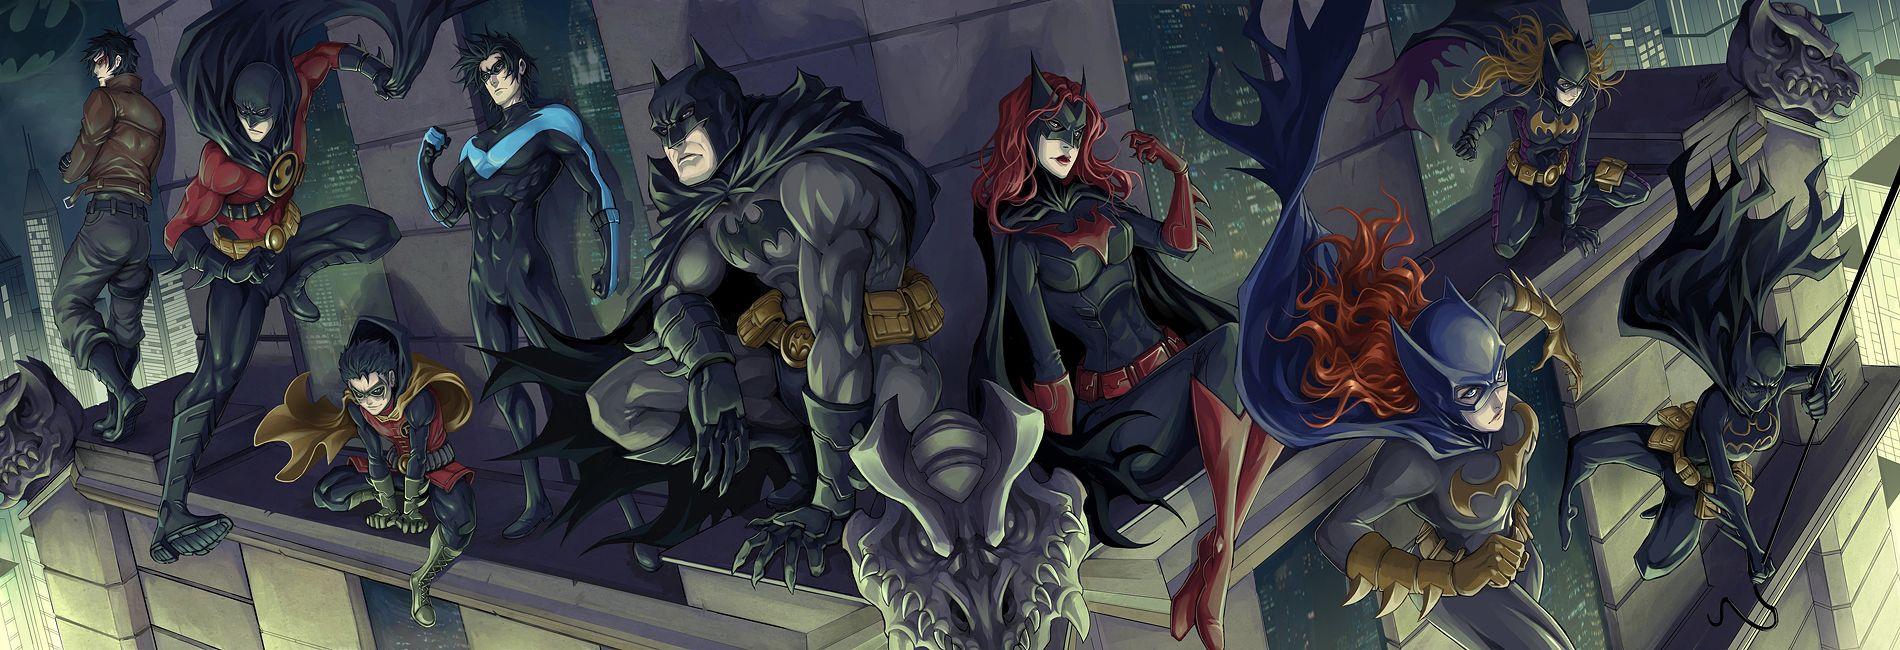 BatFamily image Tim and Family :) HD wallpaper and background